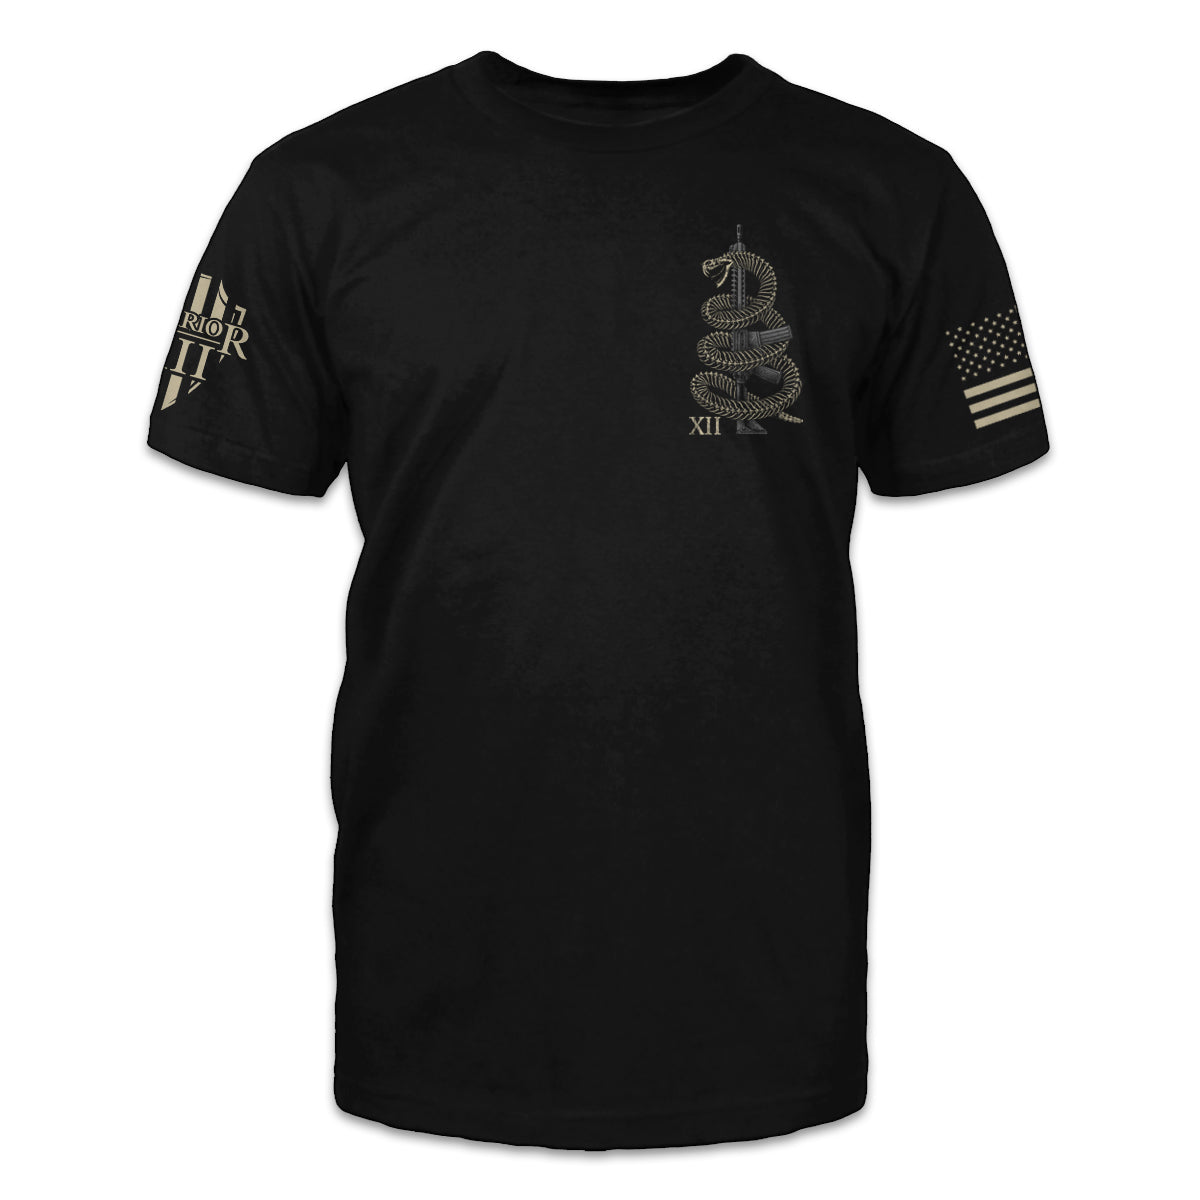 A black t-shirt with a coiled rattlesnake around a gun printed on the front of the shirt.